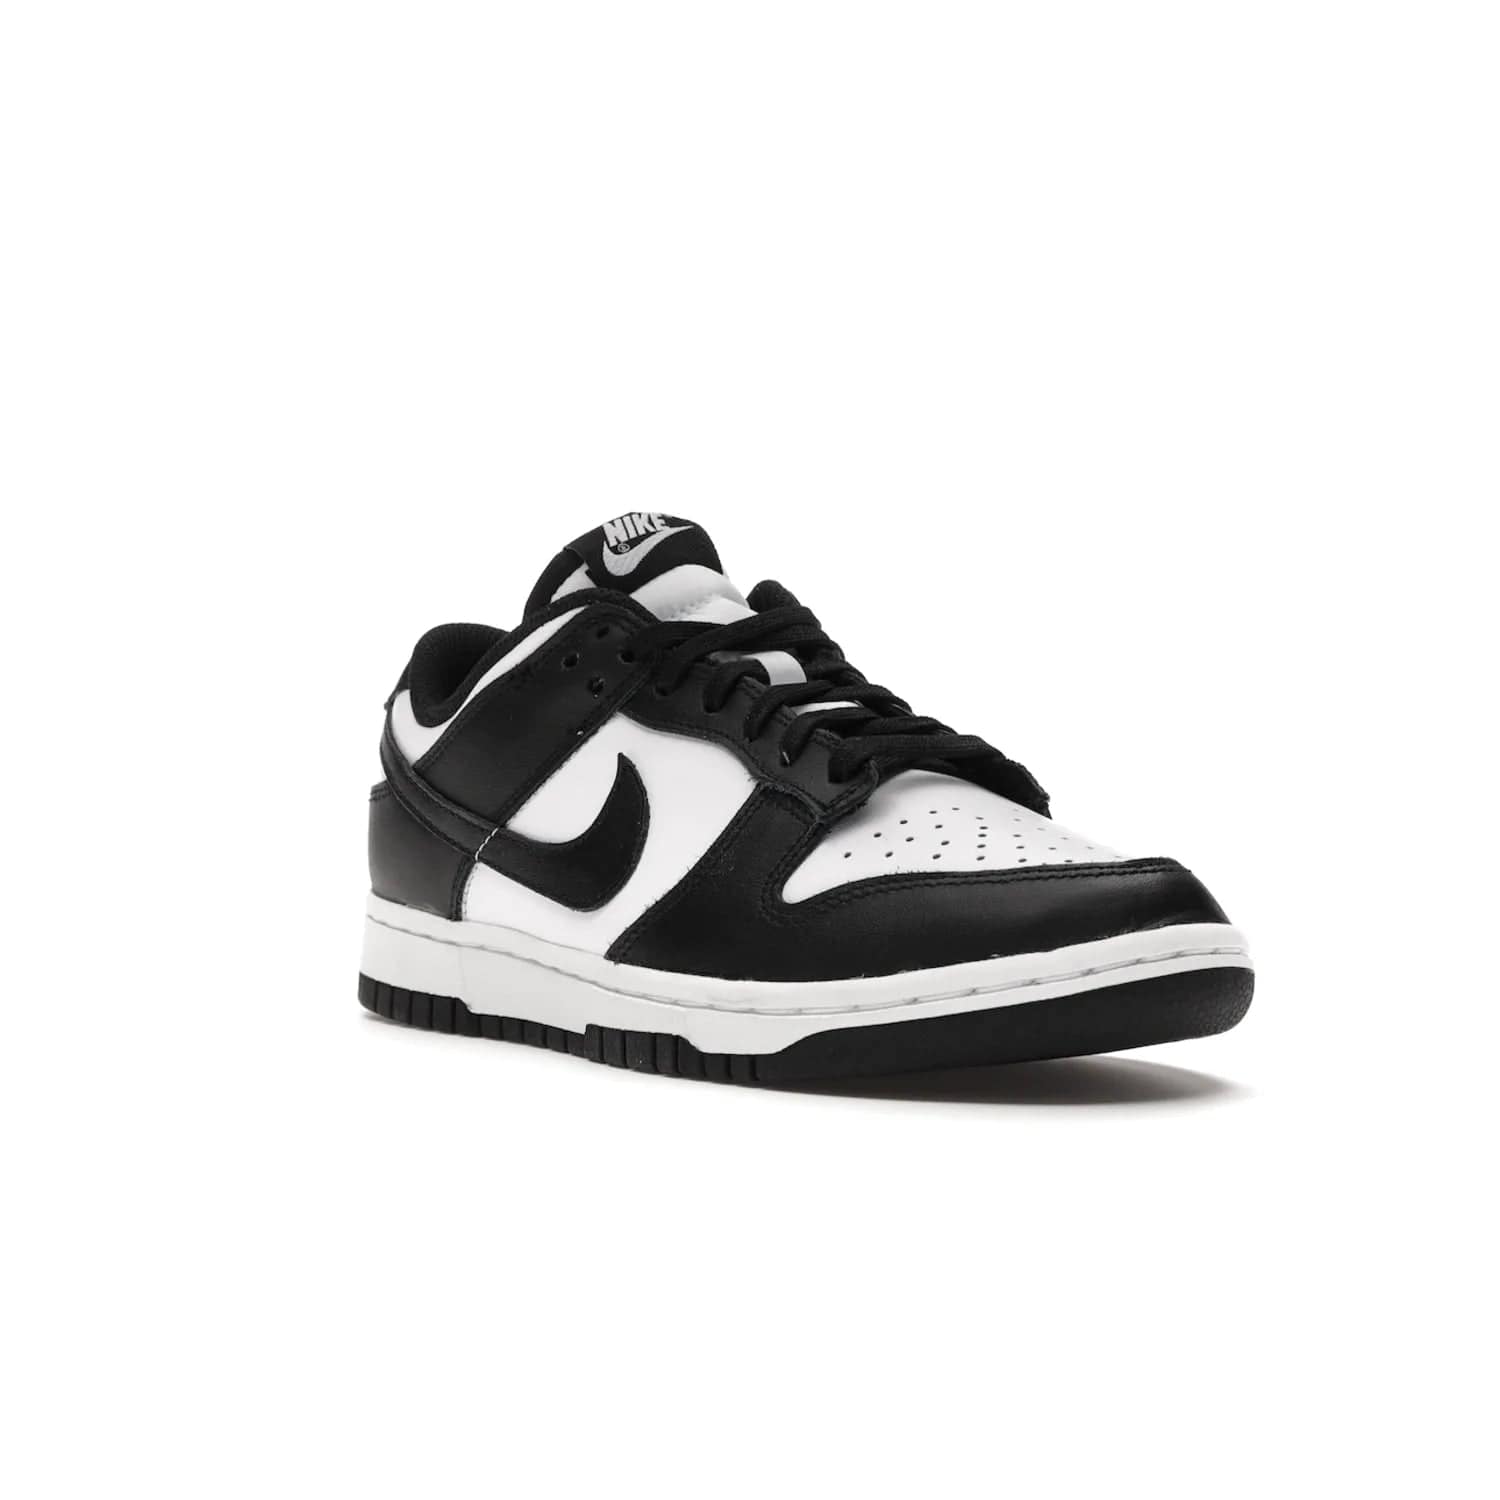 Nike Dunk Low Retro White Black Panda (2021) (Women's) - Image 6 - Only at www.BallersClubKickz.com - Say hello to the new Nike Dunk Low Retro White Black Panda (2021) (Women's)! White & black leather upper with Nike Swoosh logo. Get your pair for $100 in March 2021! Shop now!